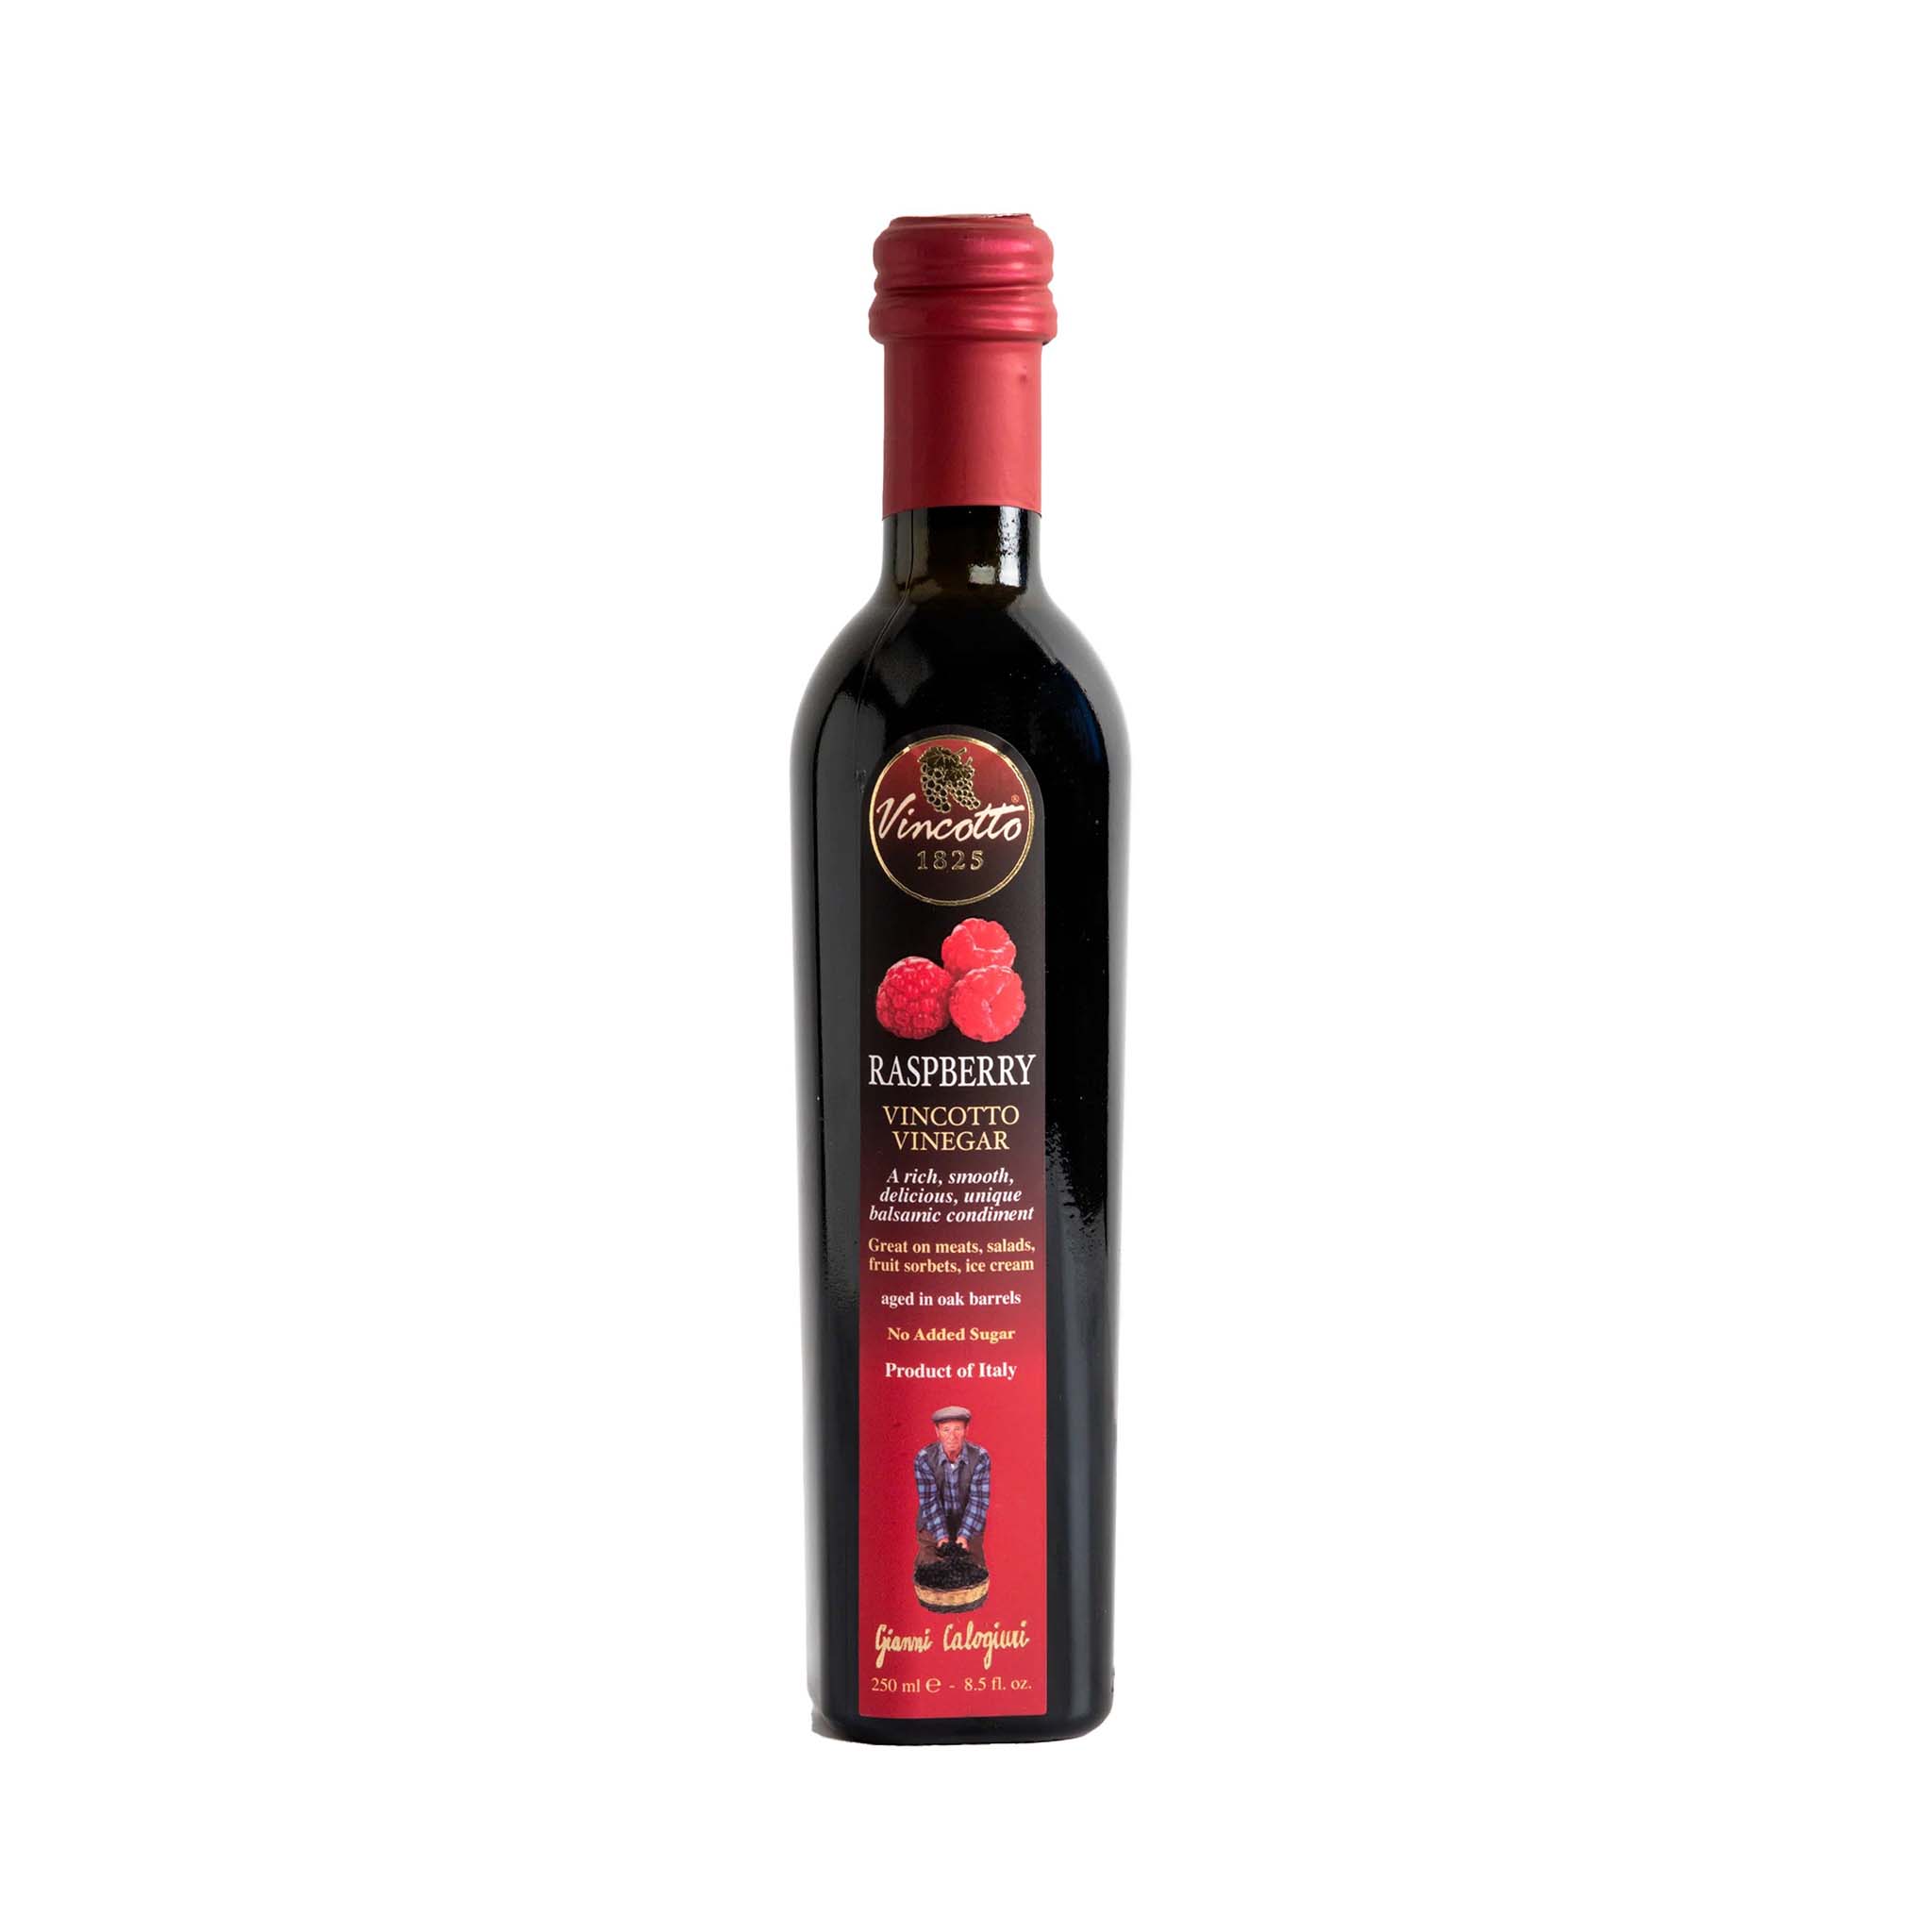 Enhance the flavor of your aged cheese, roasted lamb, or dessert with the exquisite Gianni Calogiuri Vincotto Raspberry Vinegar.